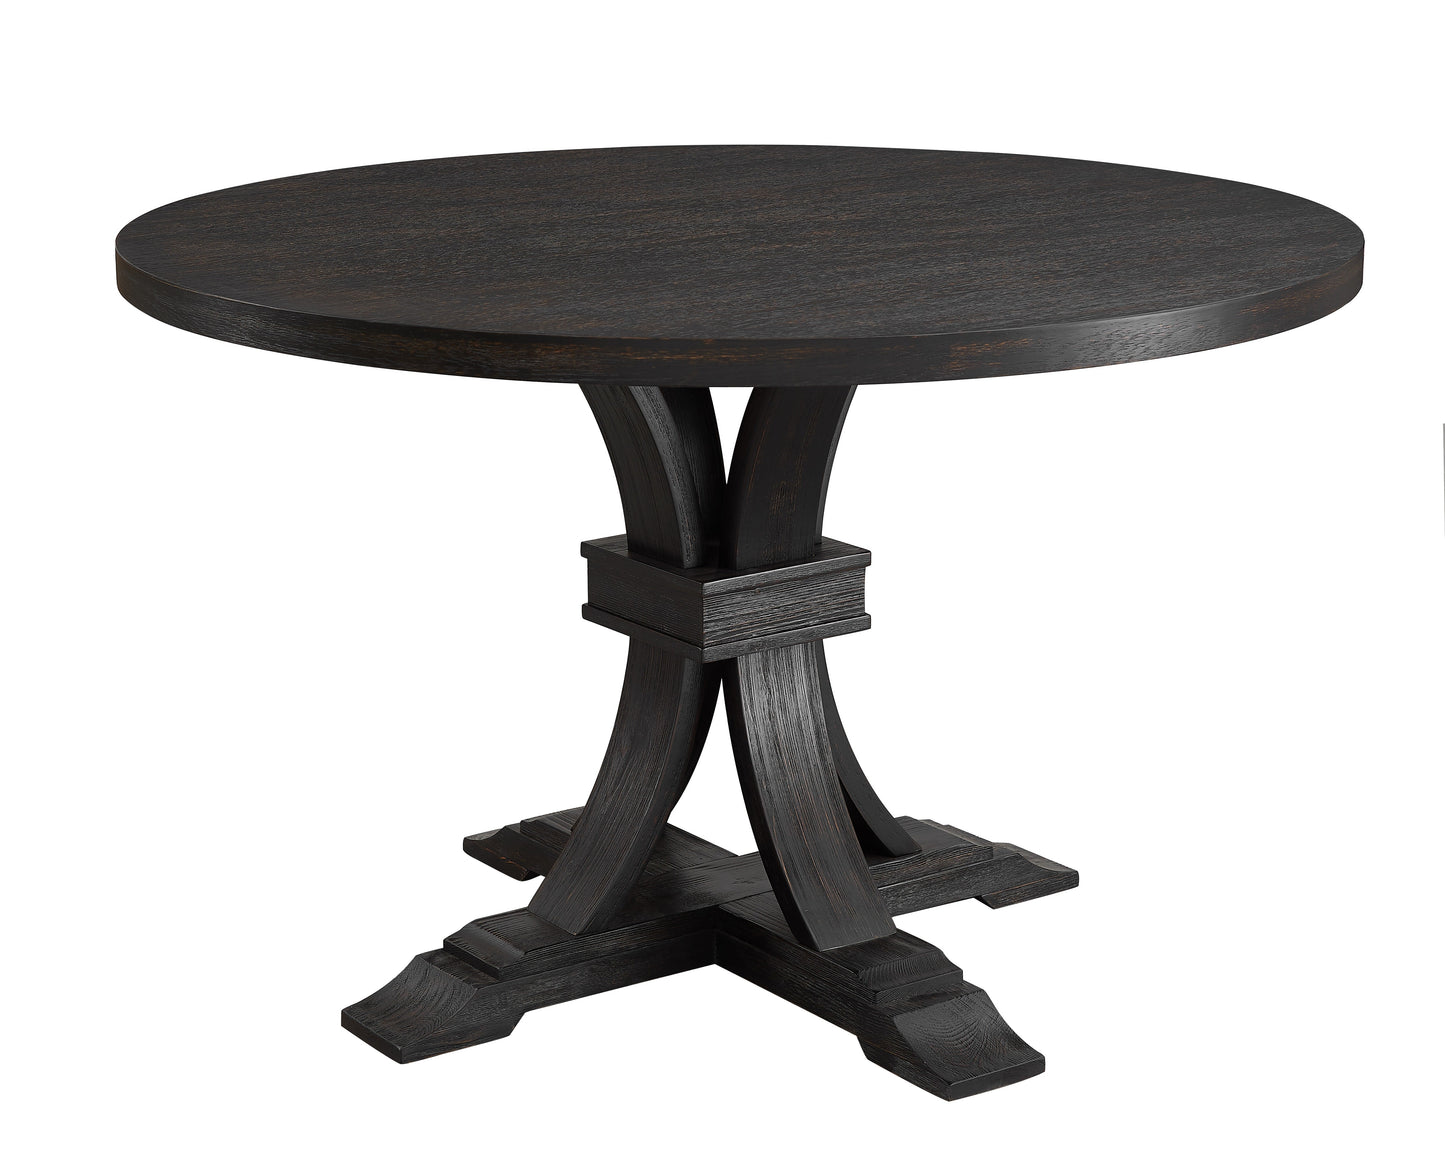 Siena Distressed Black Finish 5-Piece Dining set, Pedestal Round Table with Gray Upholstered Chairs